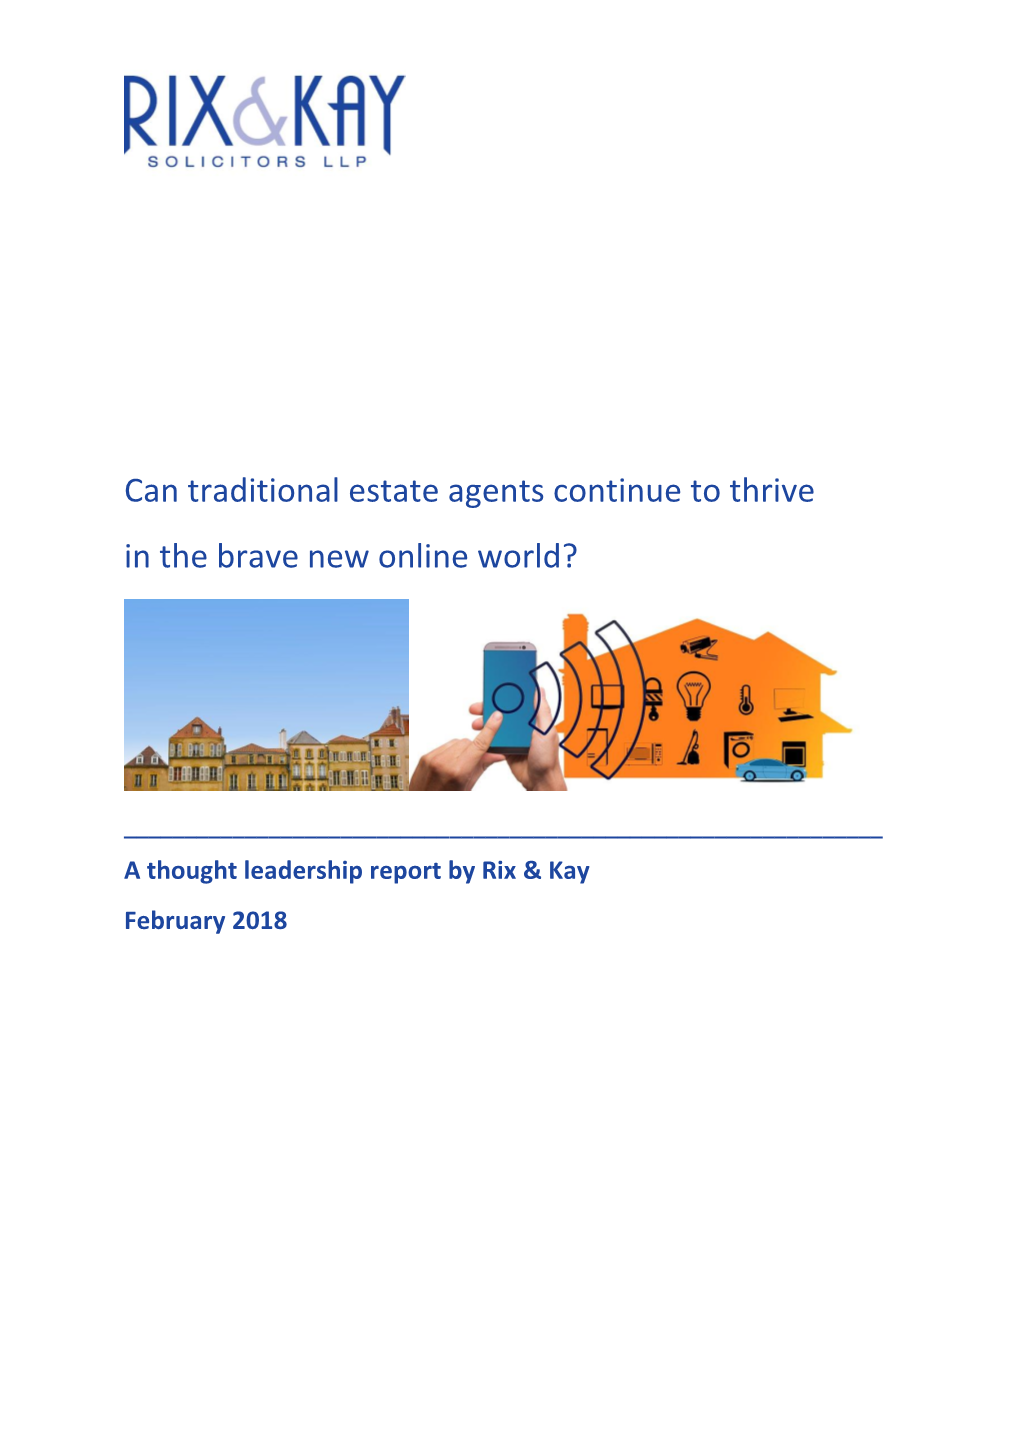 Can Traditional Estate Agents Continue to Thrive in the Brave New Online World?